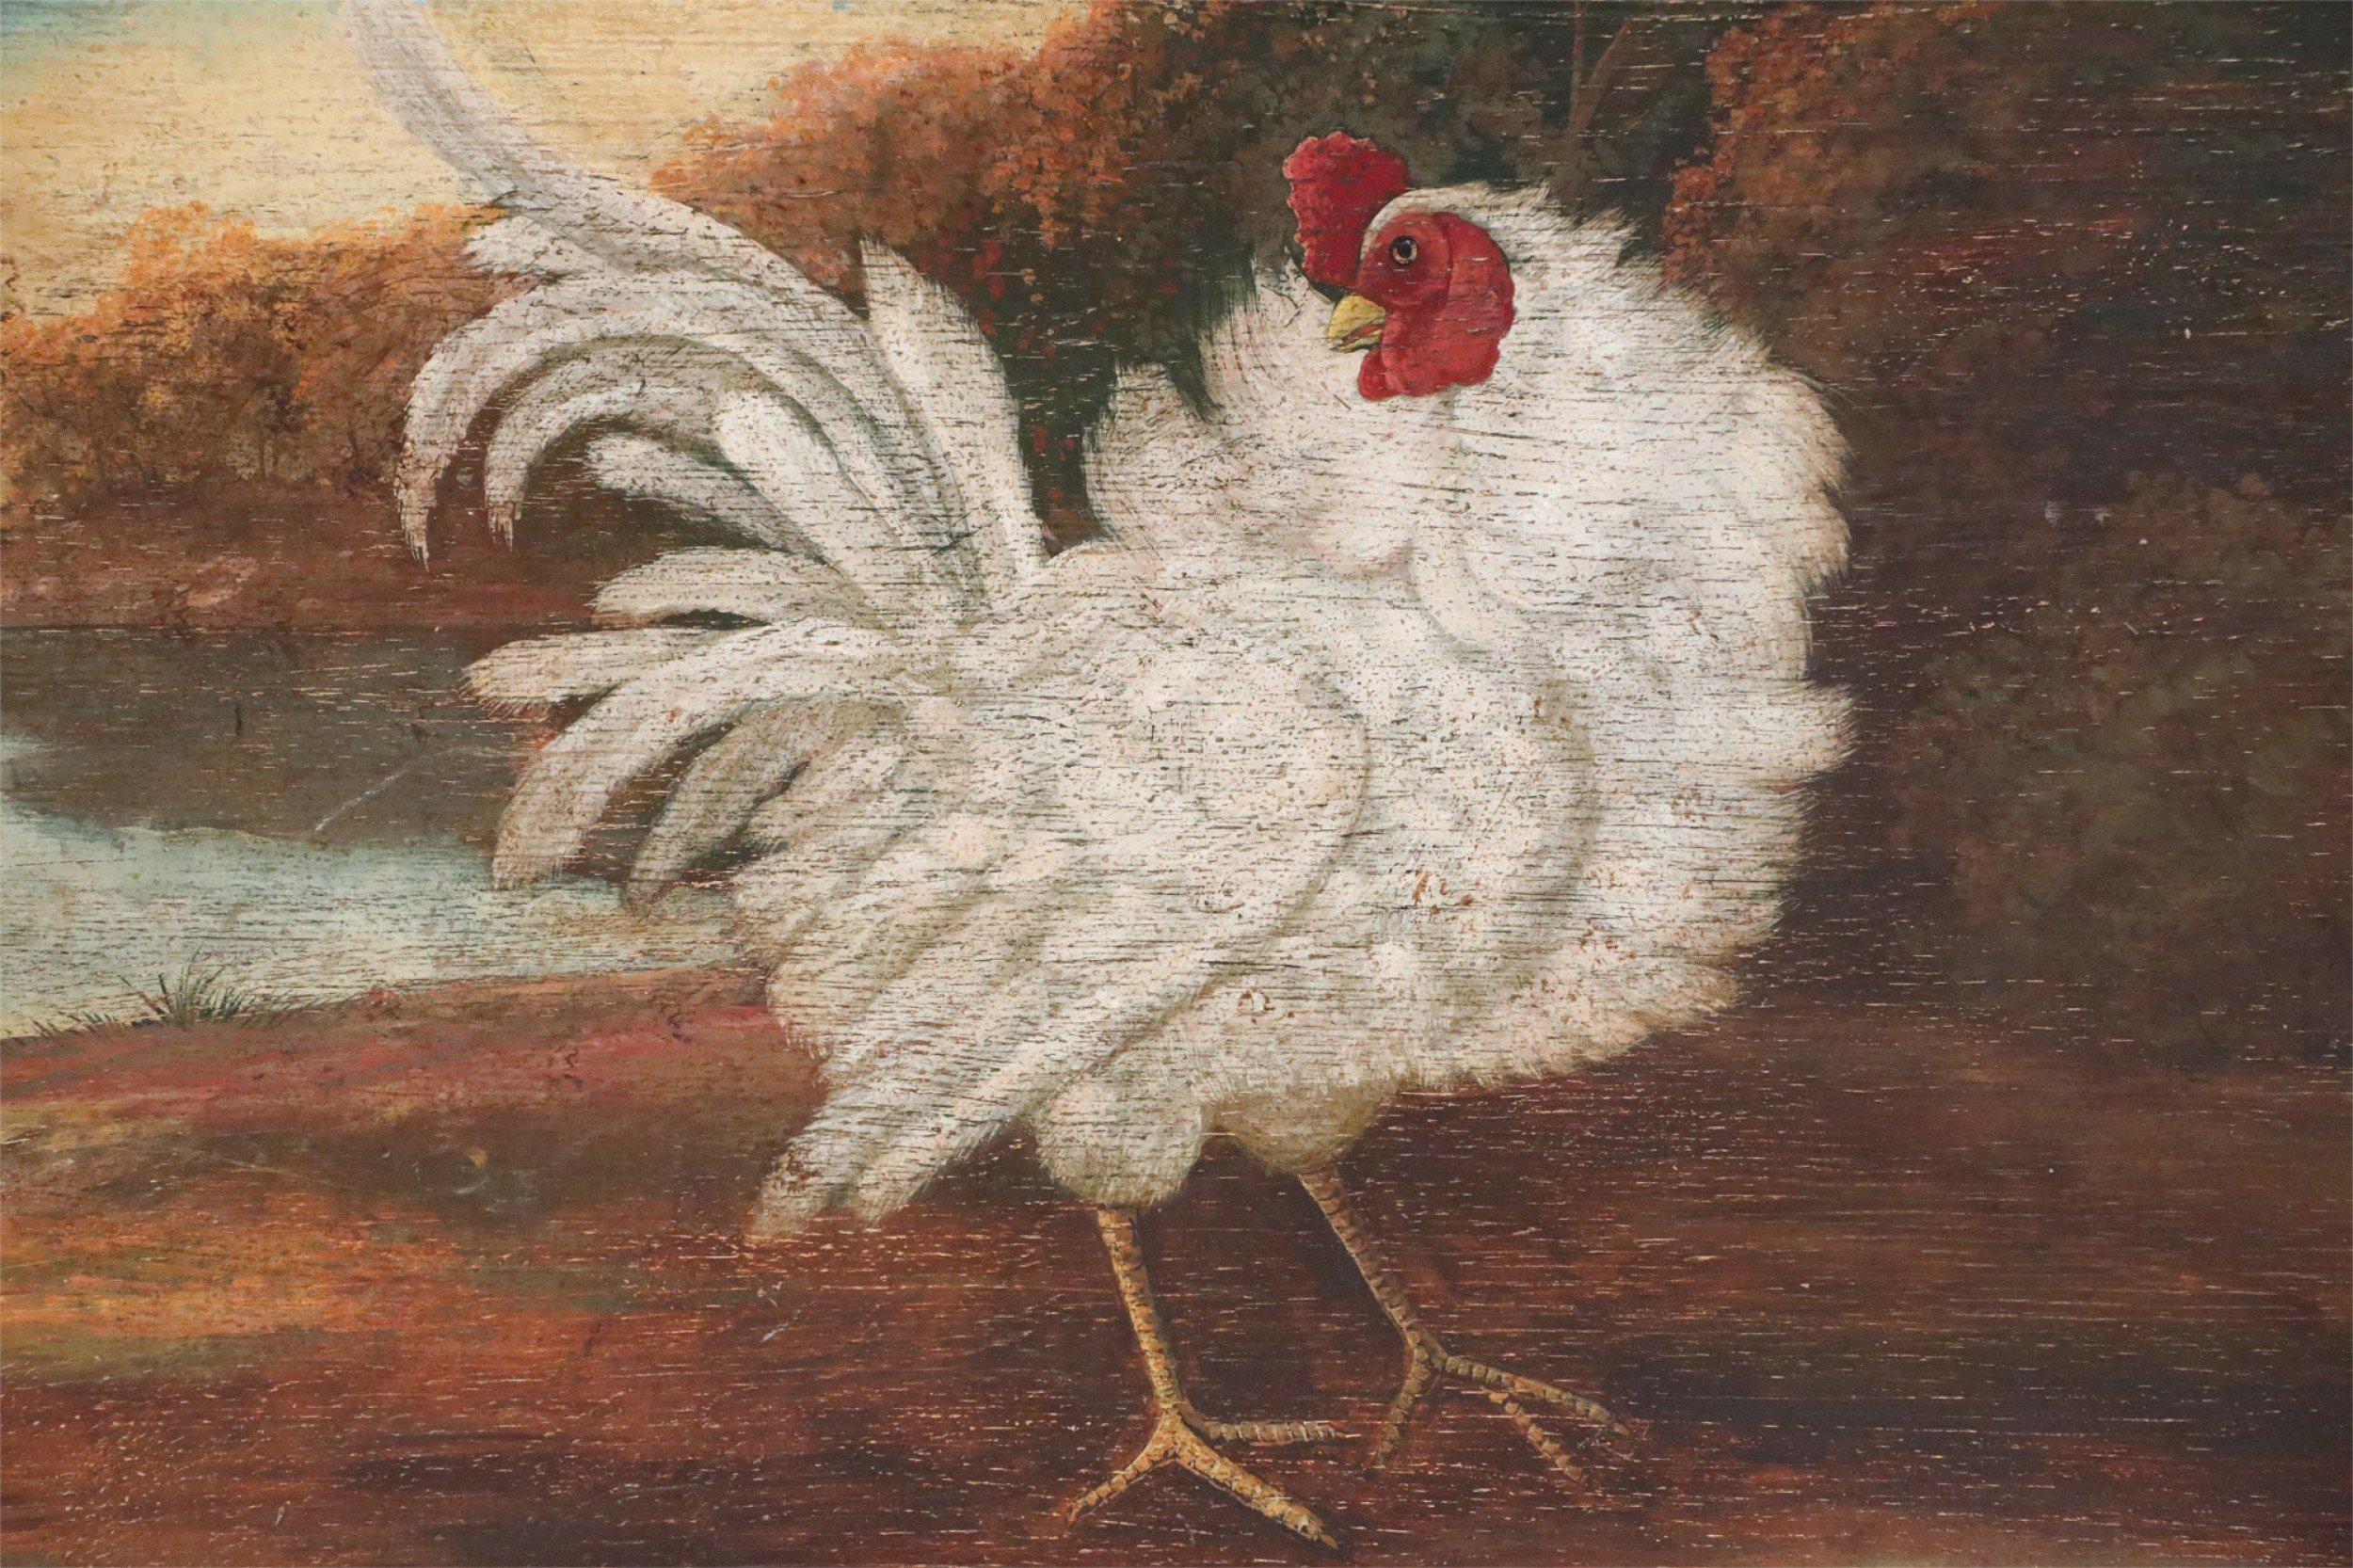 Vintage (20th Century) print of a rooster standing on red clay and looking to the side, in front of a blue pond and autumnal trees, on plywood.
  